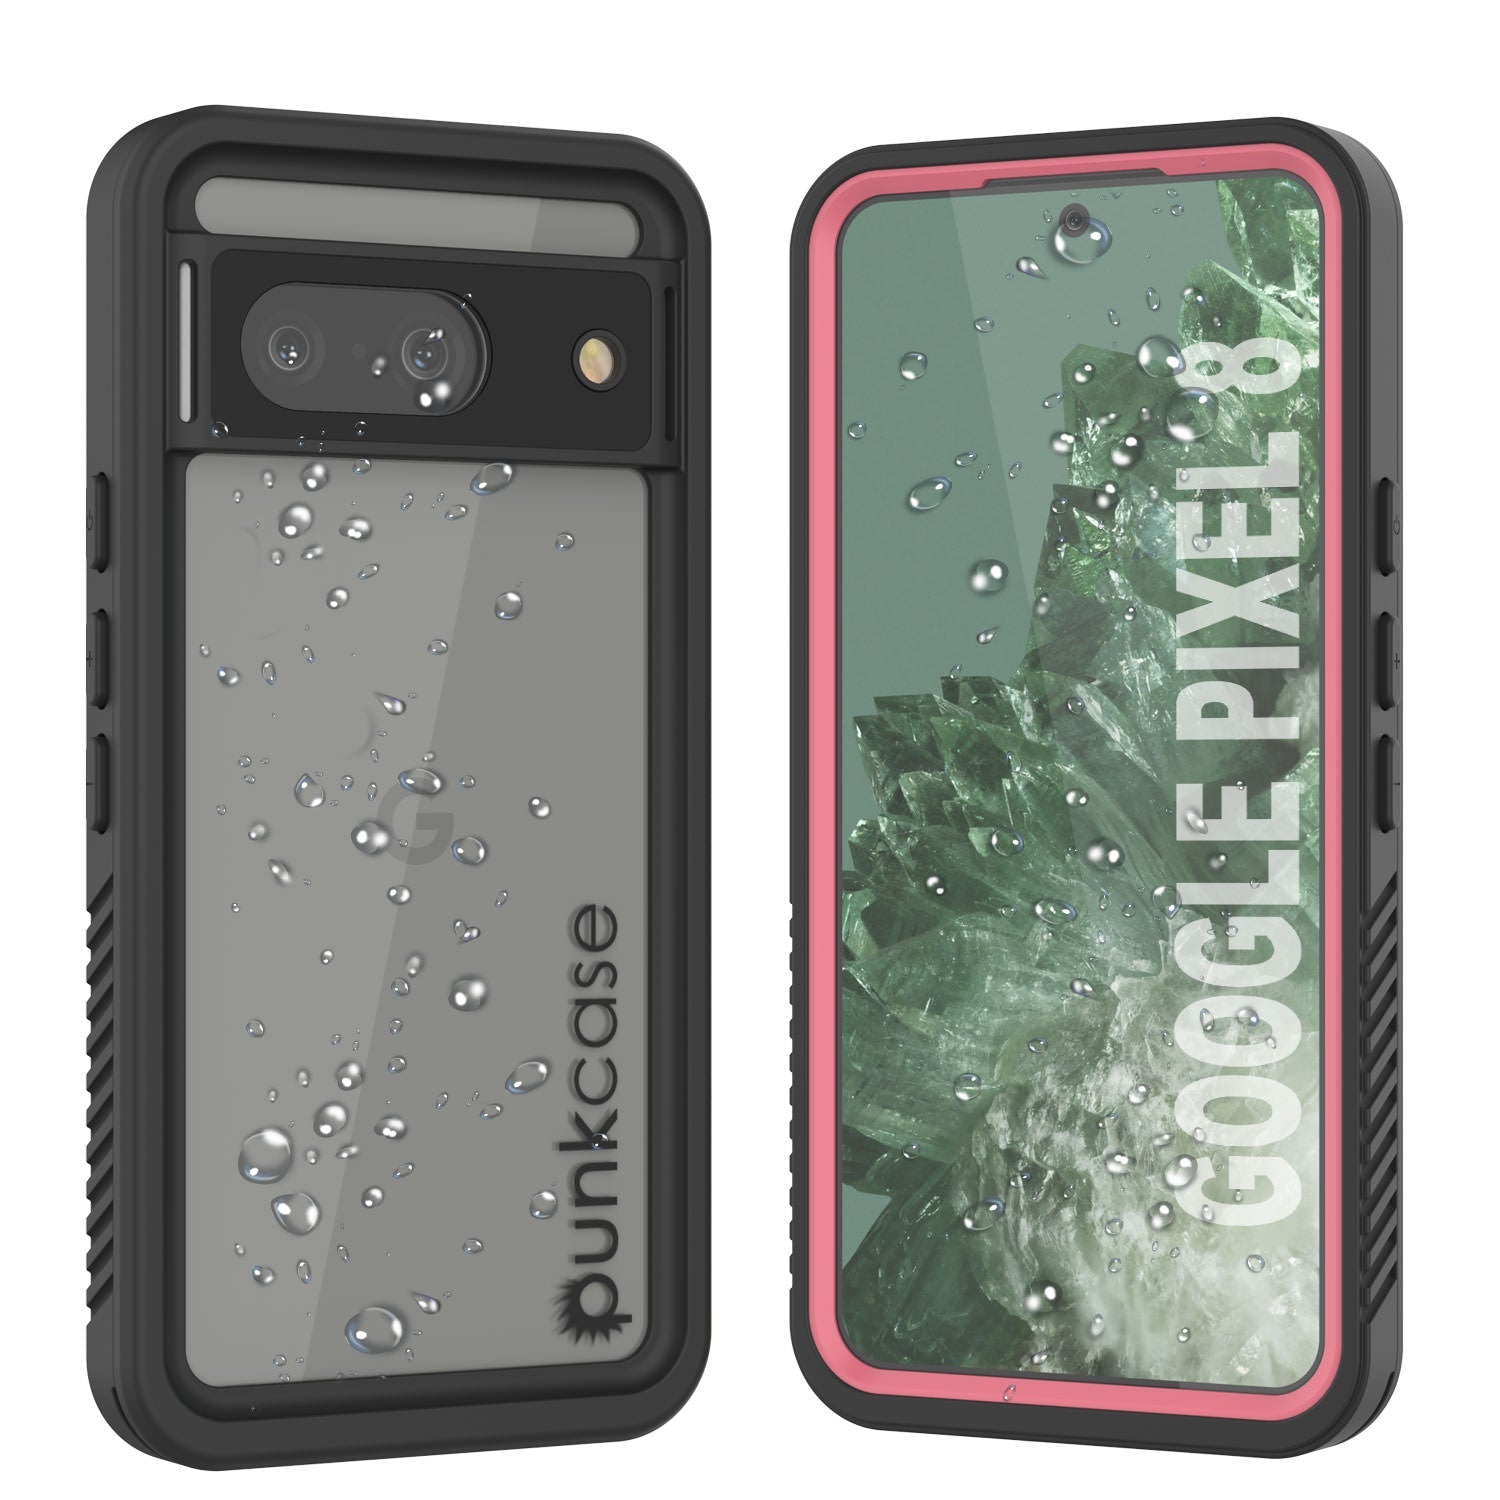 Ghostek Nautical Slim Pixel 6 Case Waterproof with Screen Protector and Camera Lens Cover Built-In Tough Heavy Duty Shockproof Protection Phone